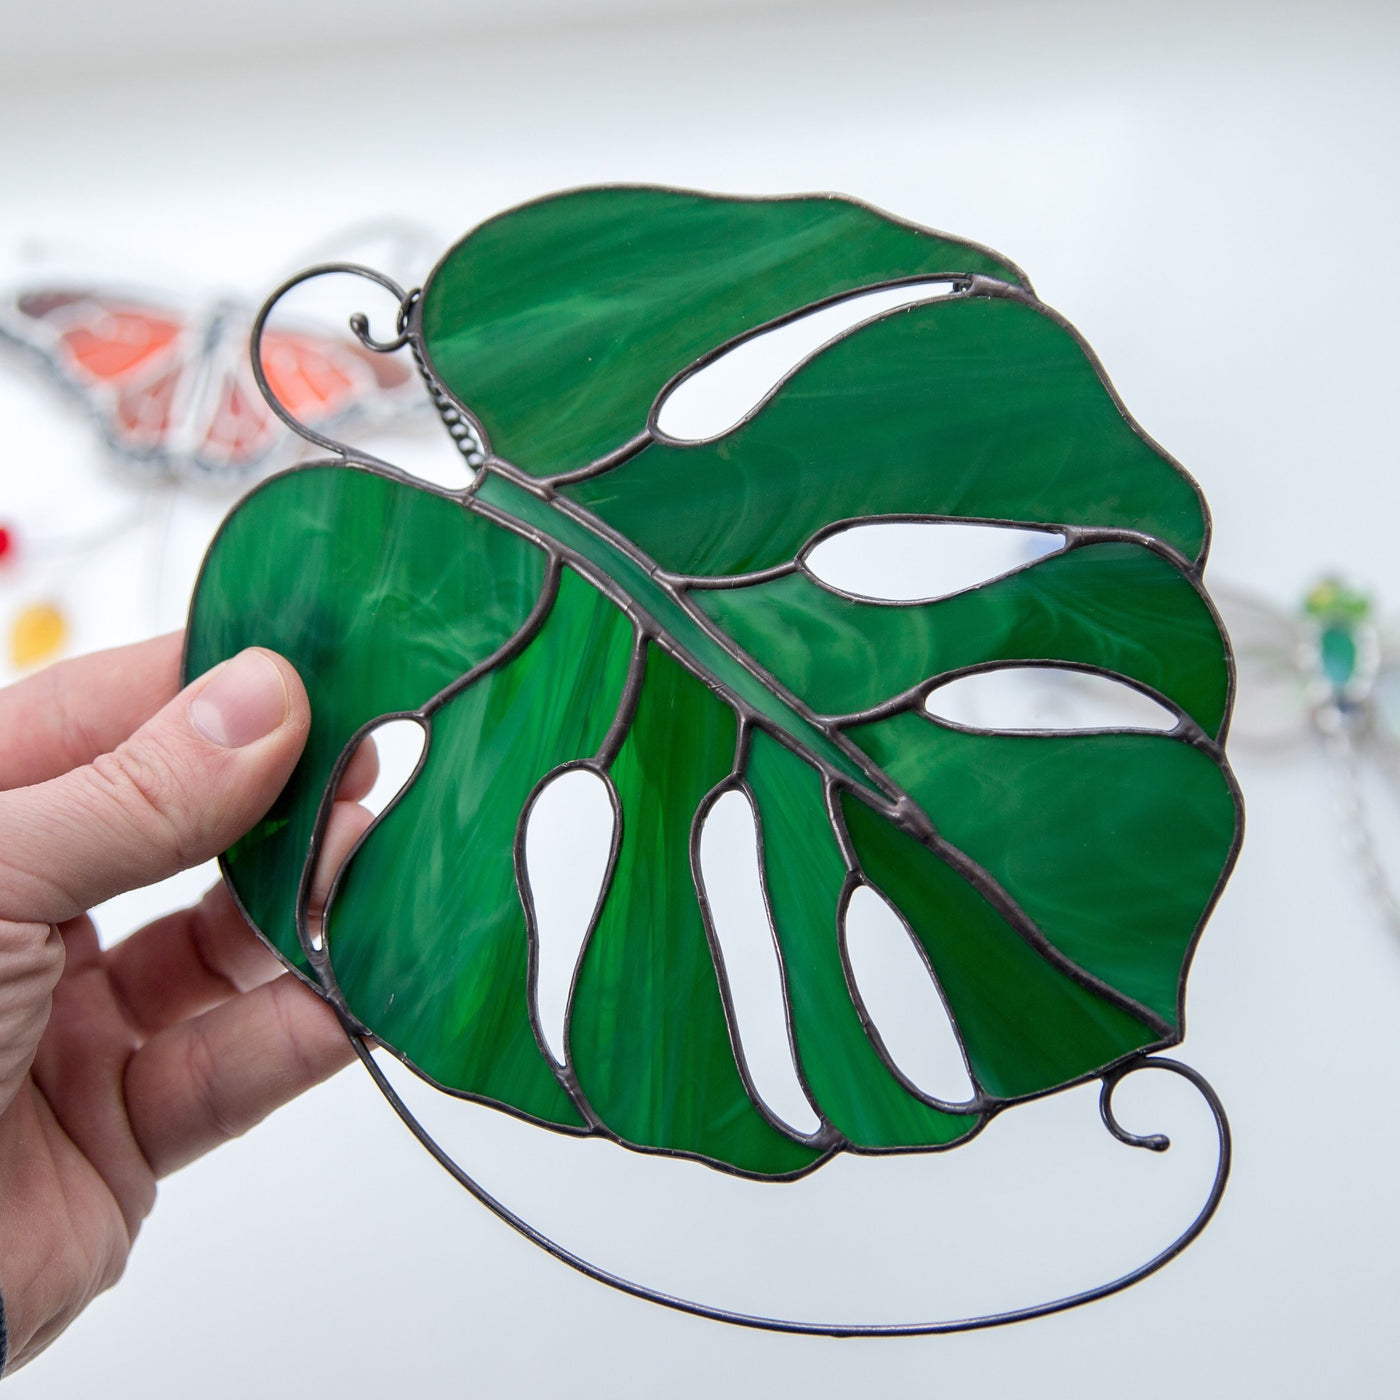 Suncatcher of a stained glass monstera leaf for home decor